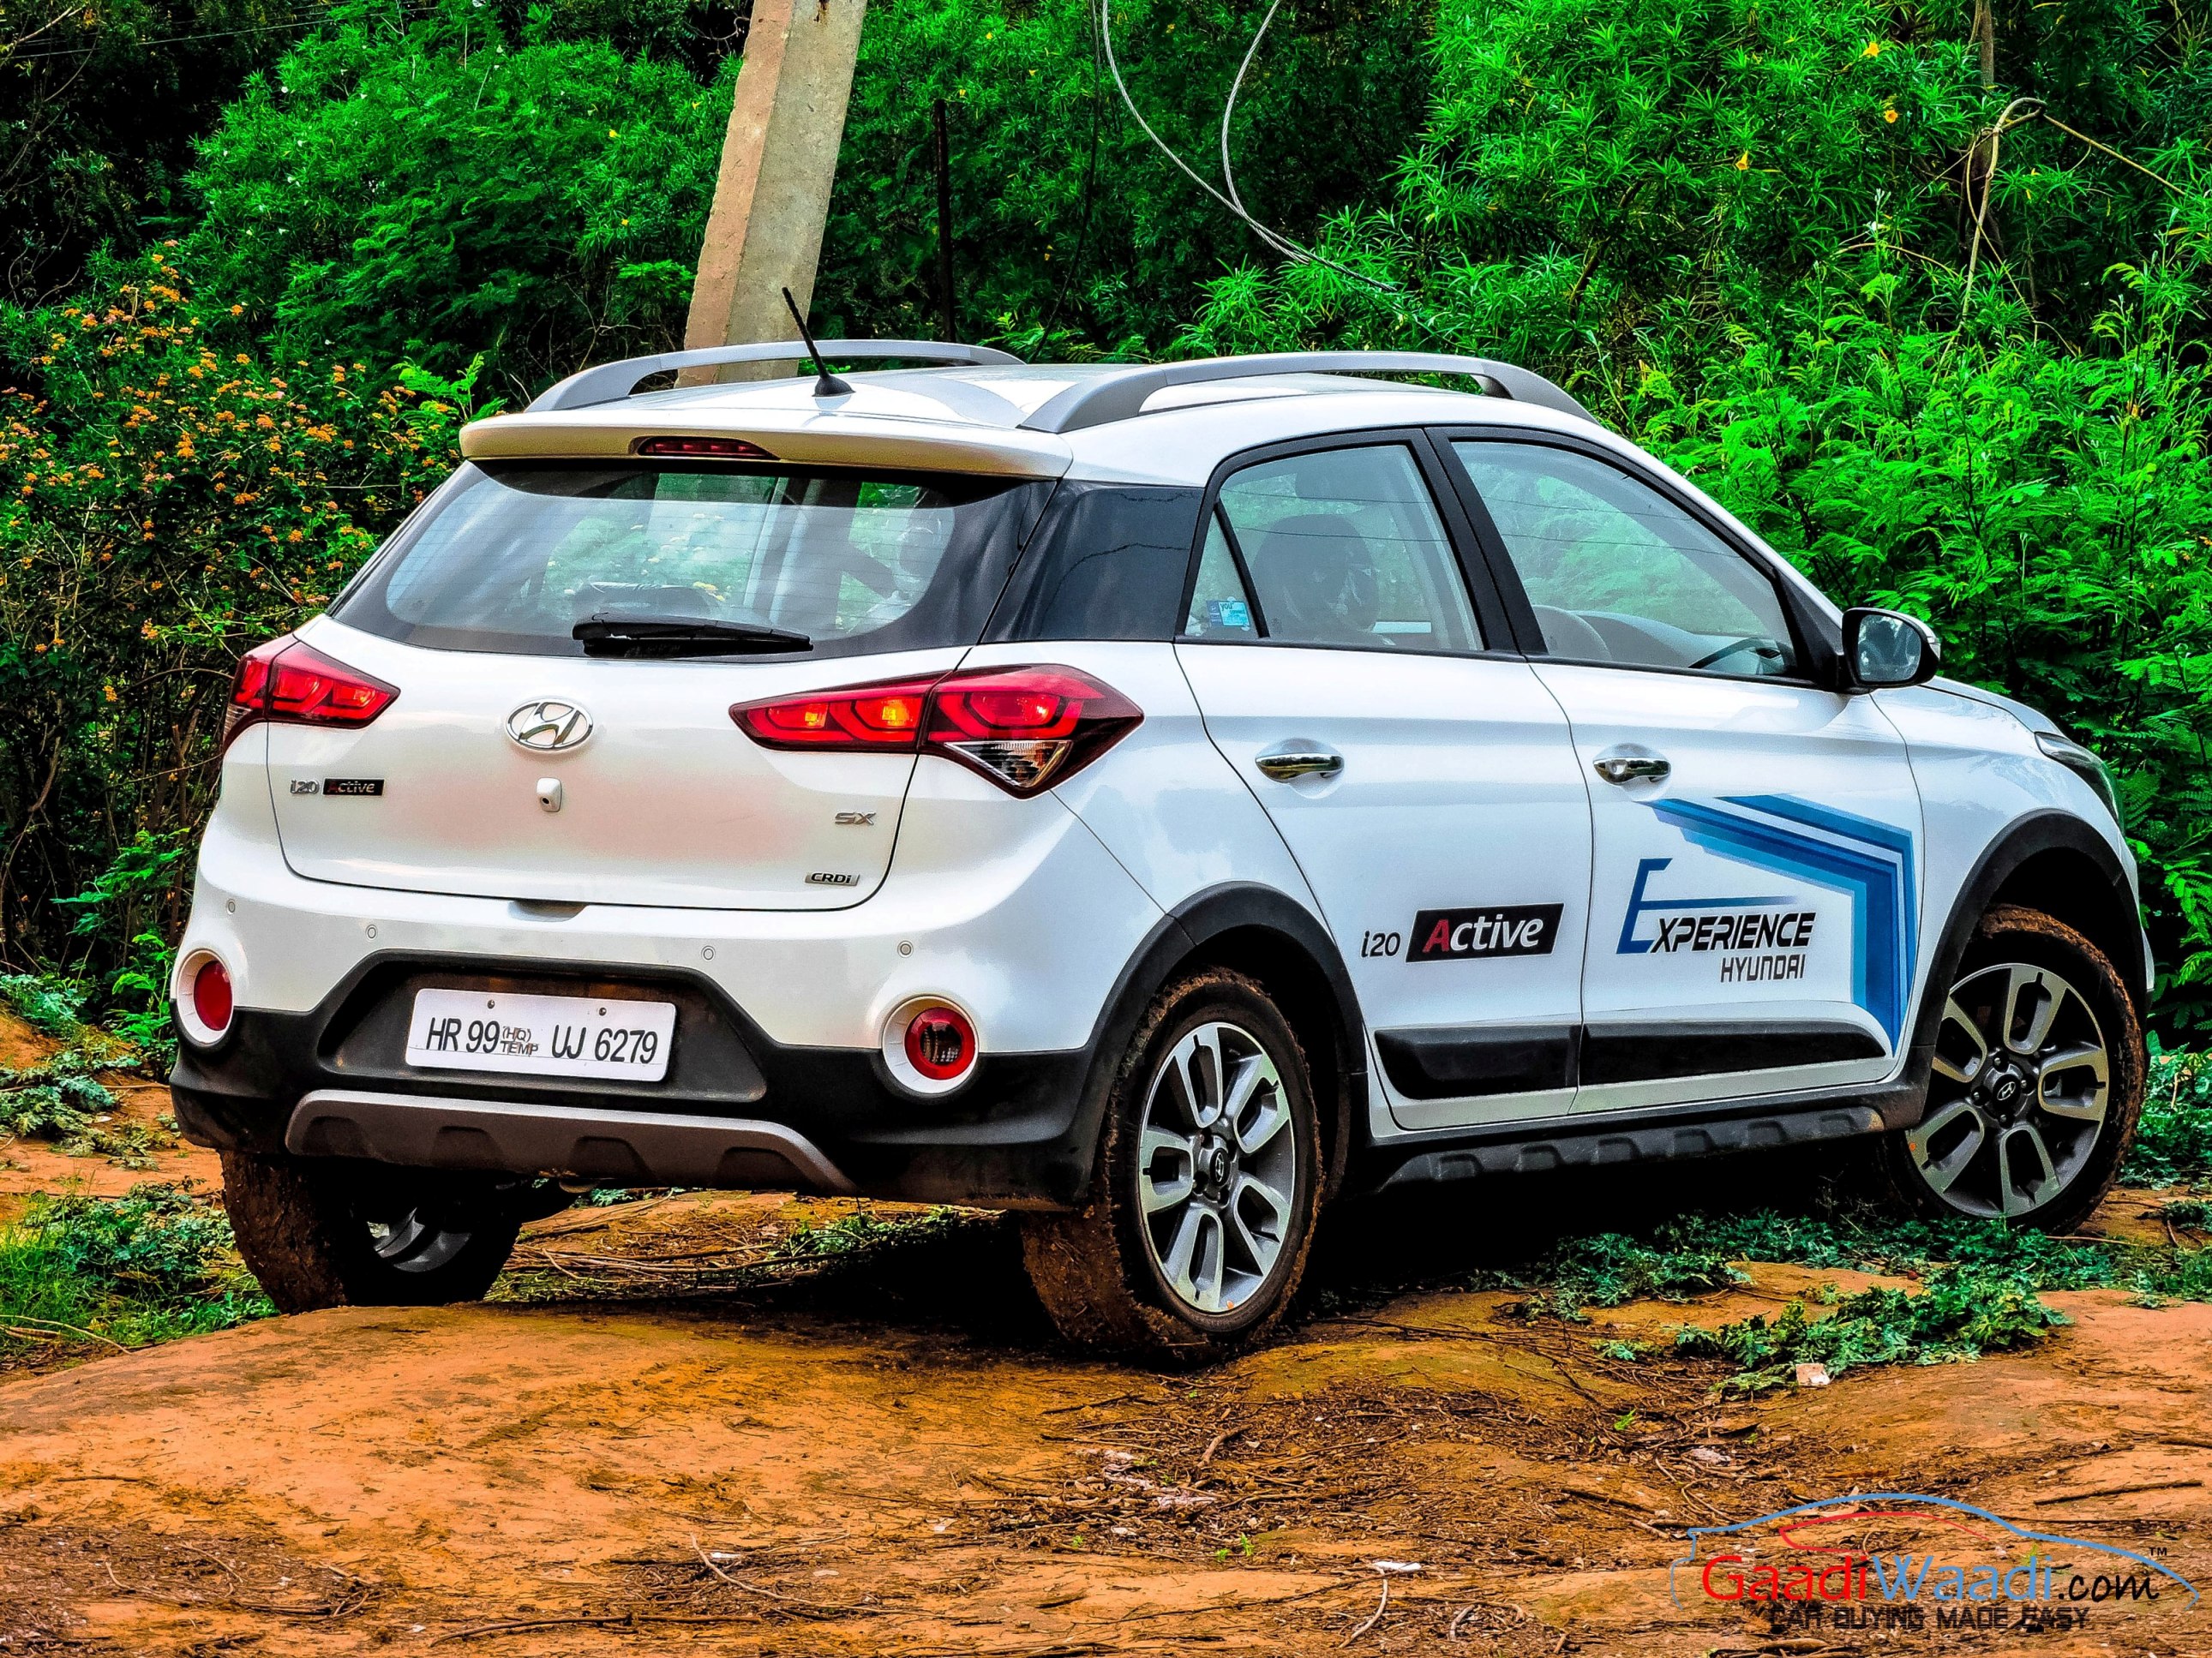 2018 Hyundai i20 Active Looks Sportier and Aggressive in